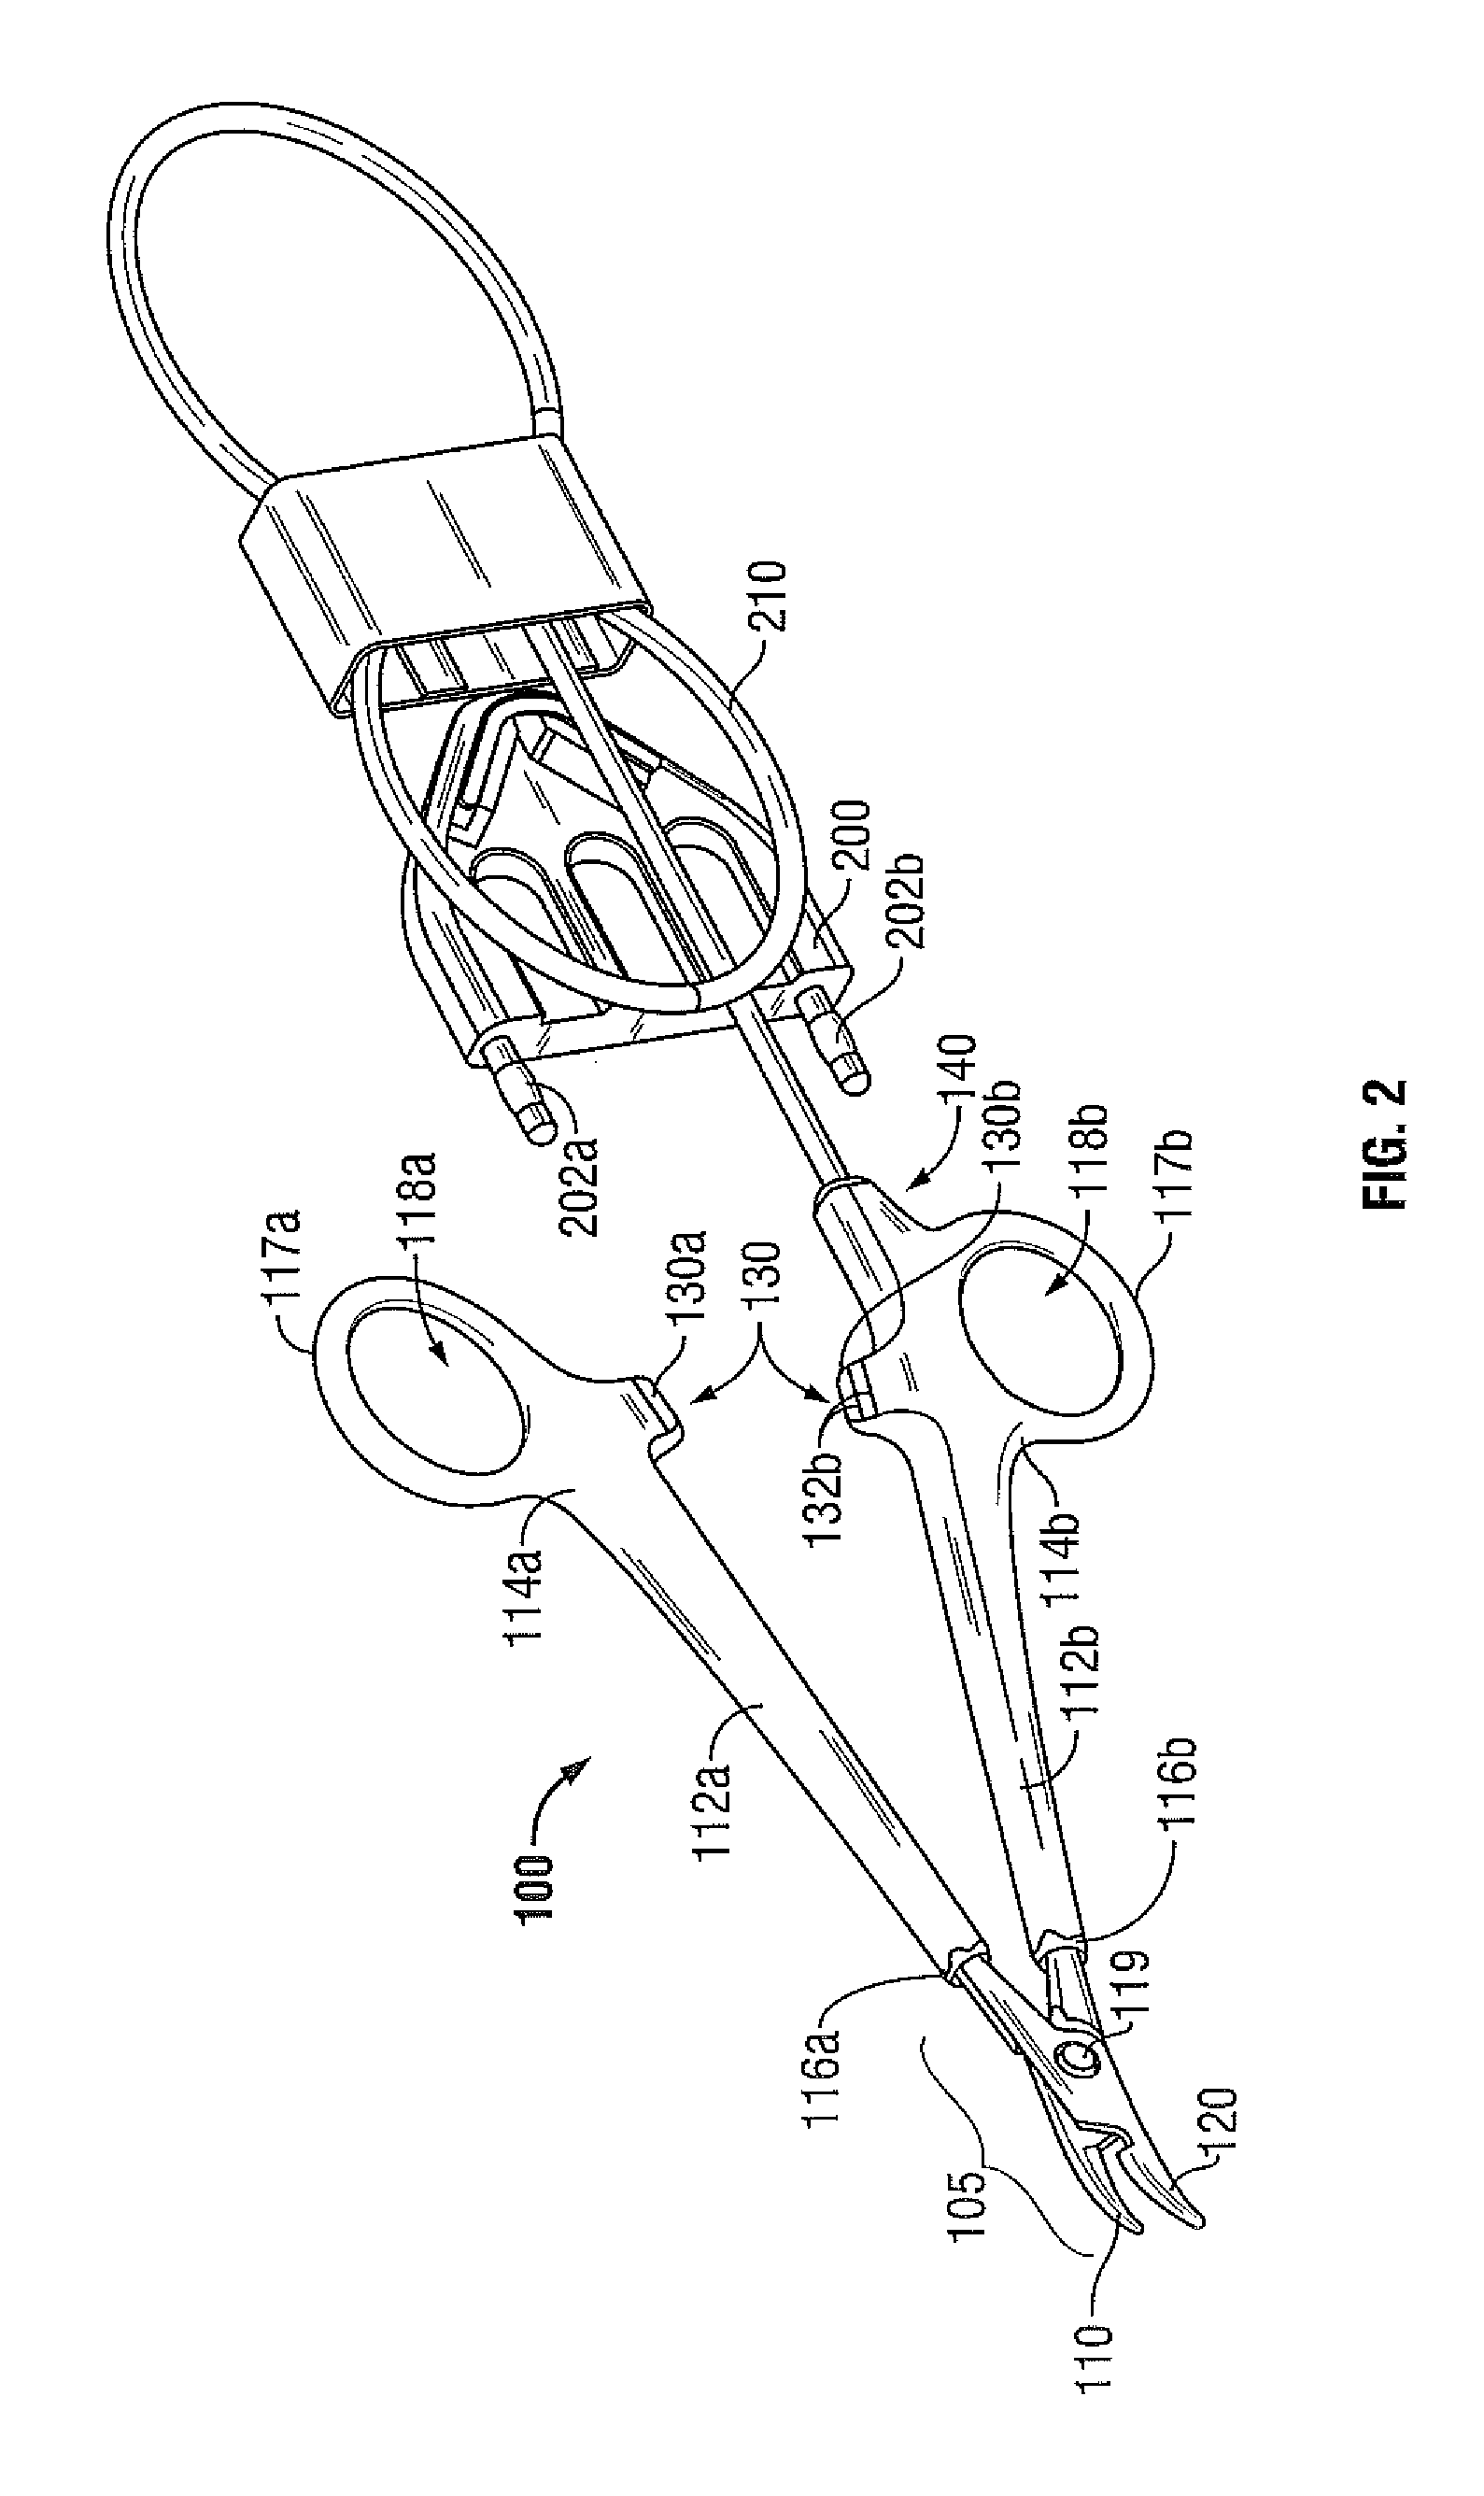 Method and Apparatus for Vascular Tissue Sealing with Reduced Energy Consumption